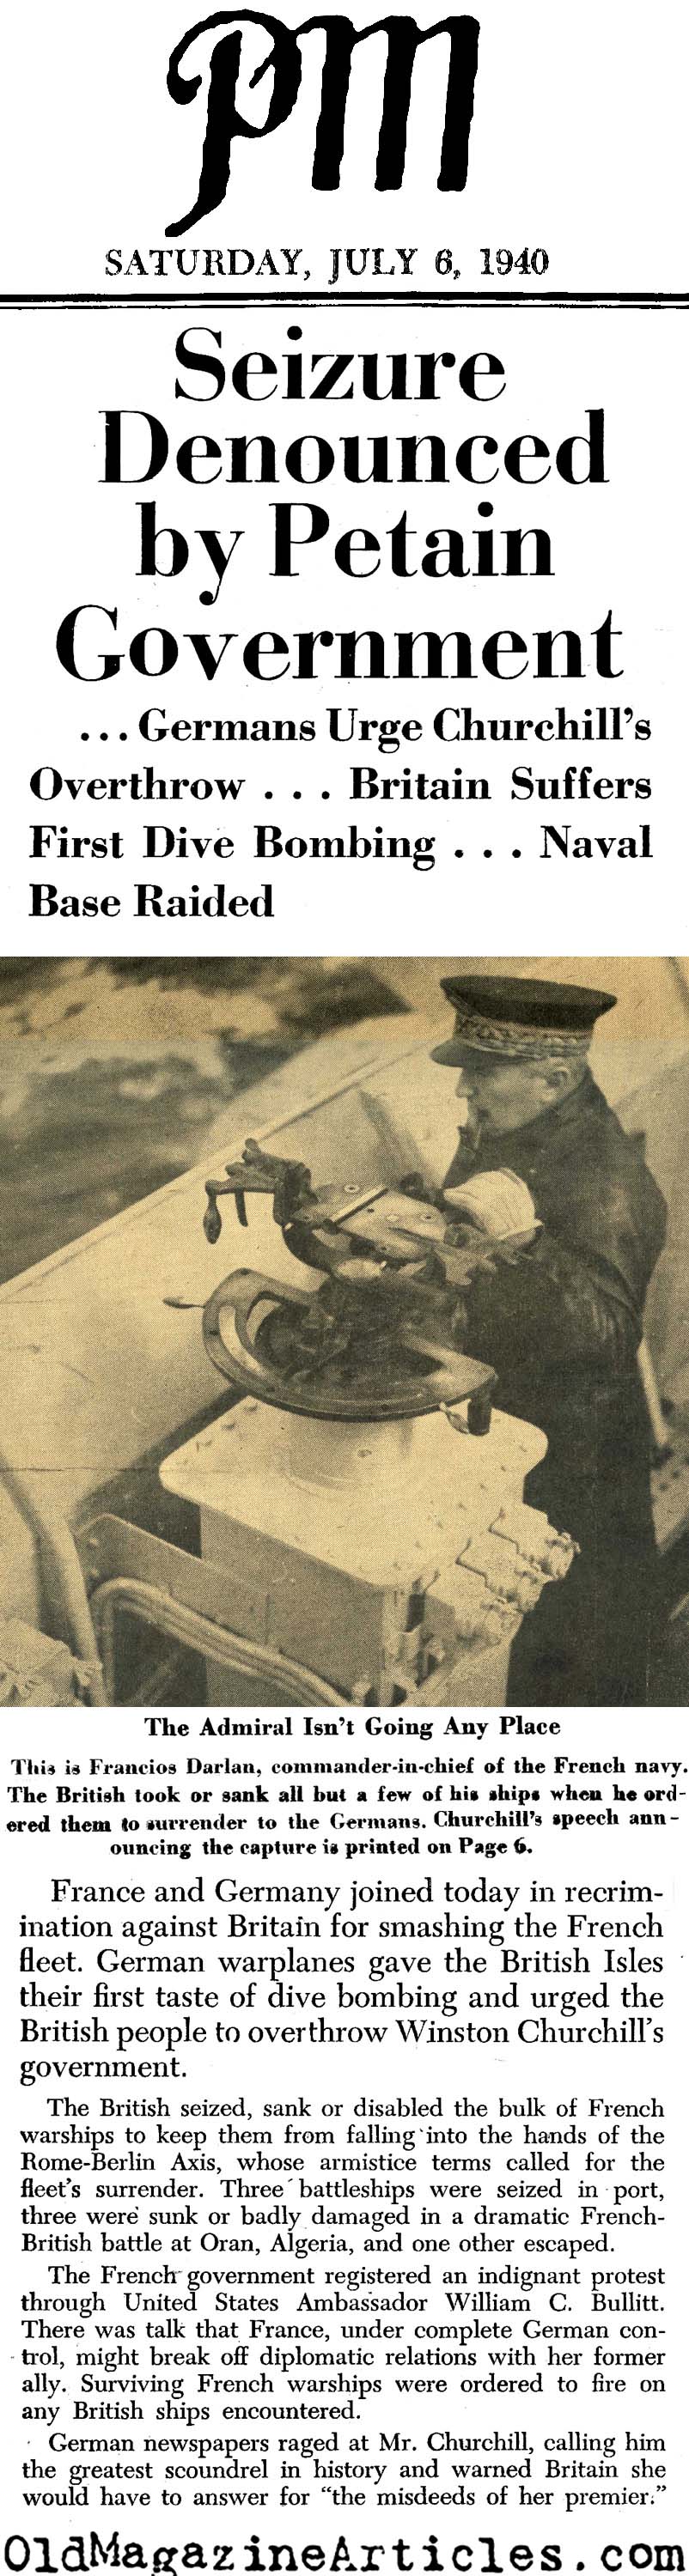 The French Navy In The Balance (PM Tabloid, 1940)